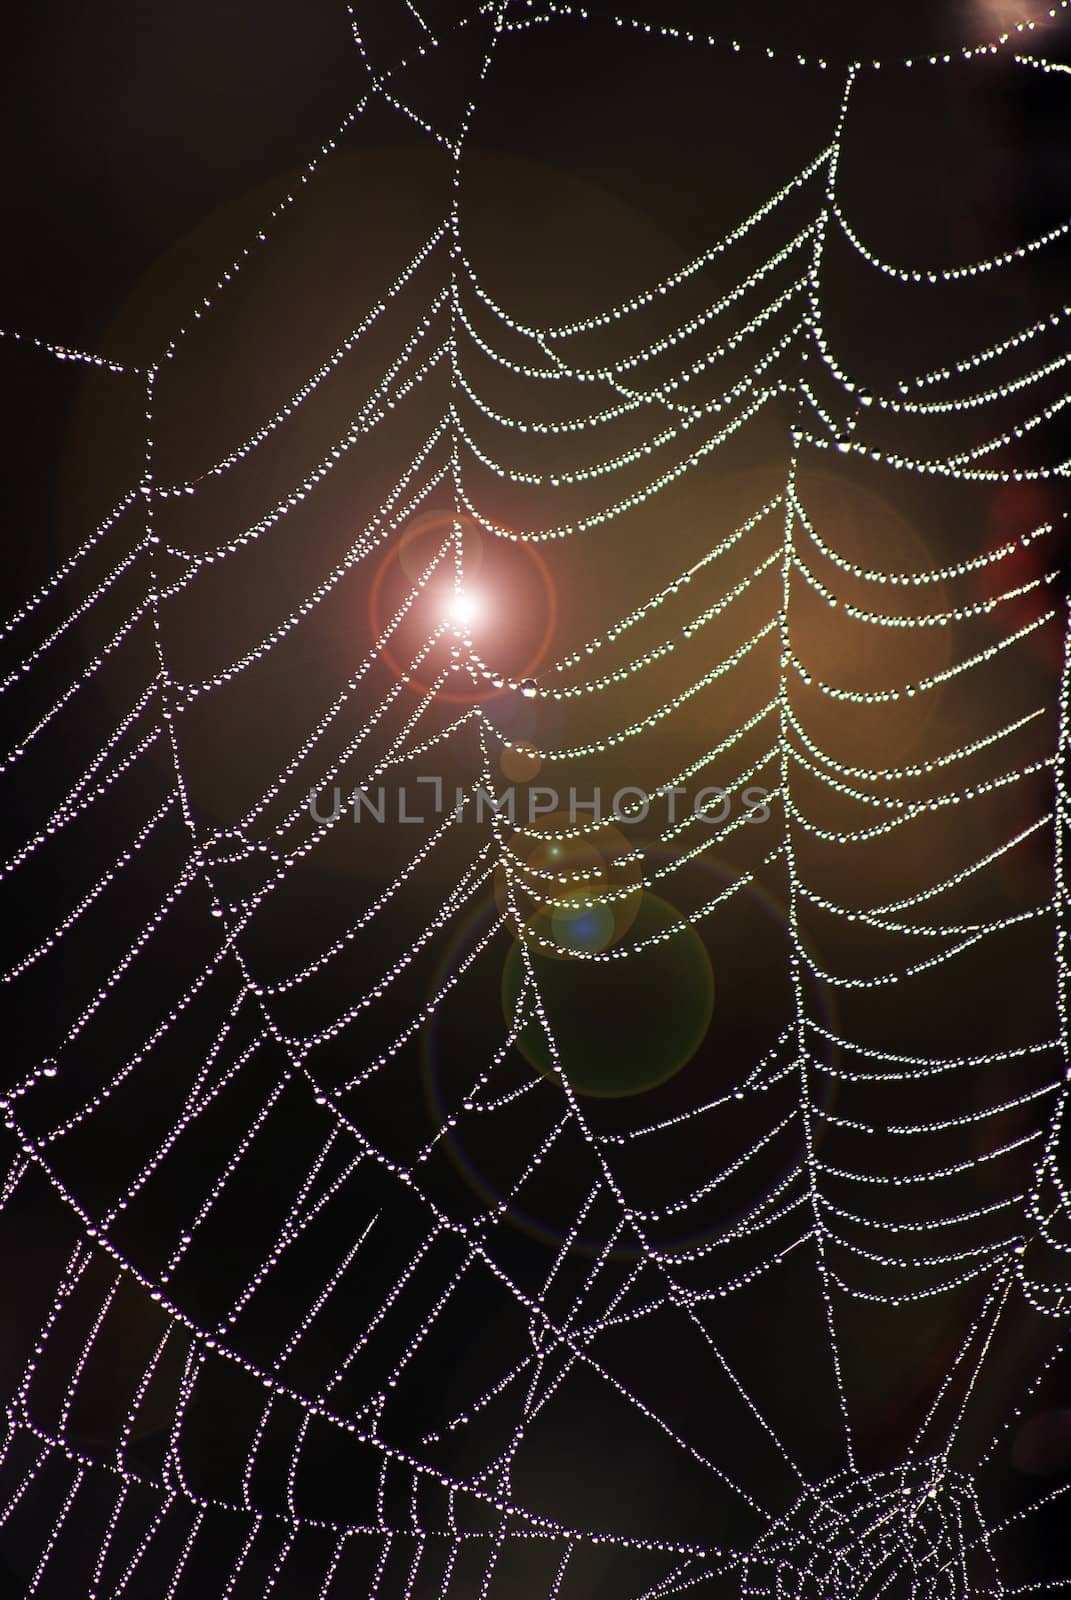 picture of a beauty web at morning